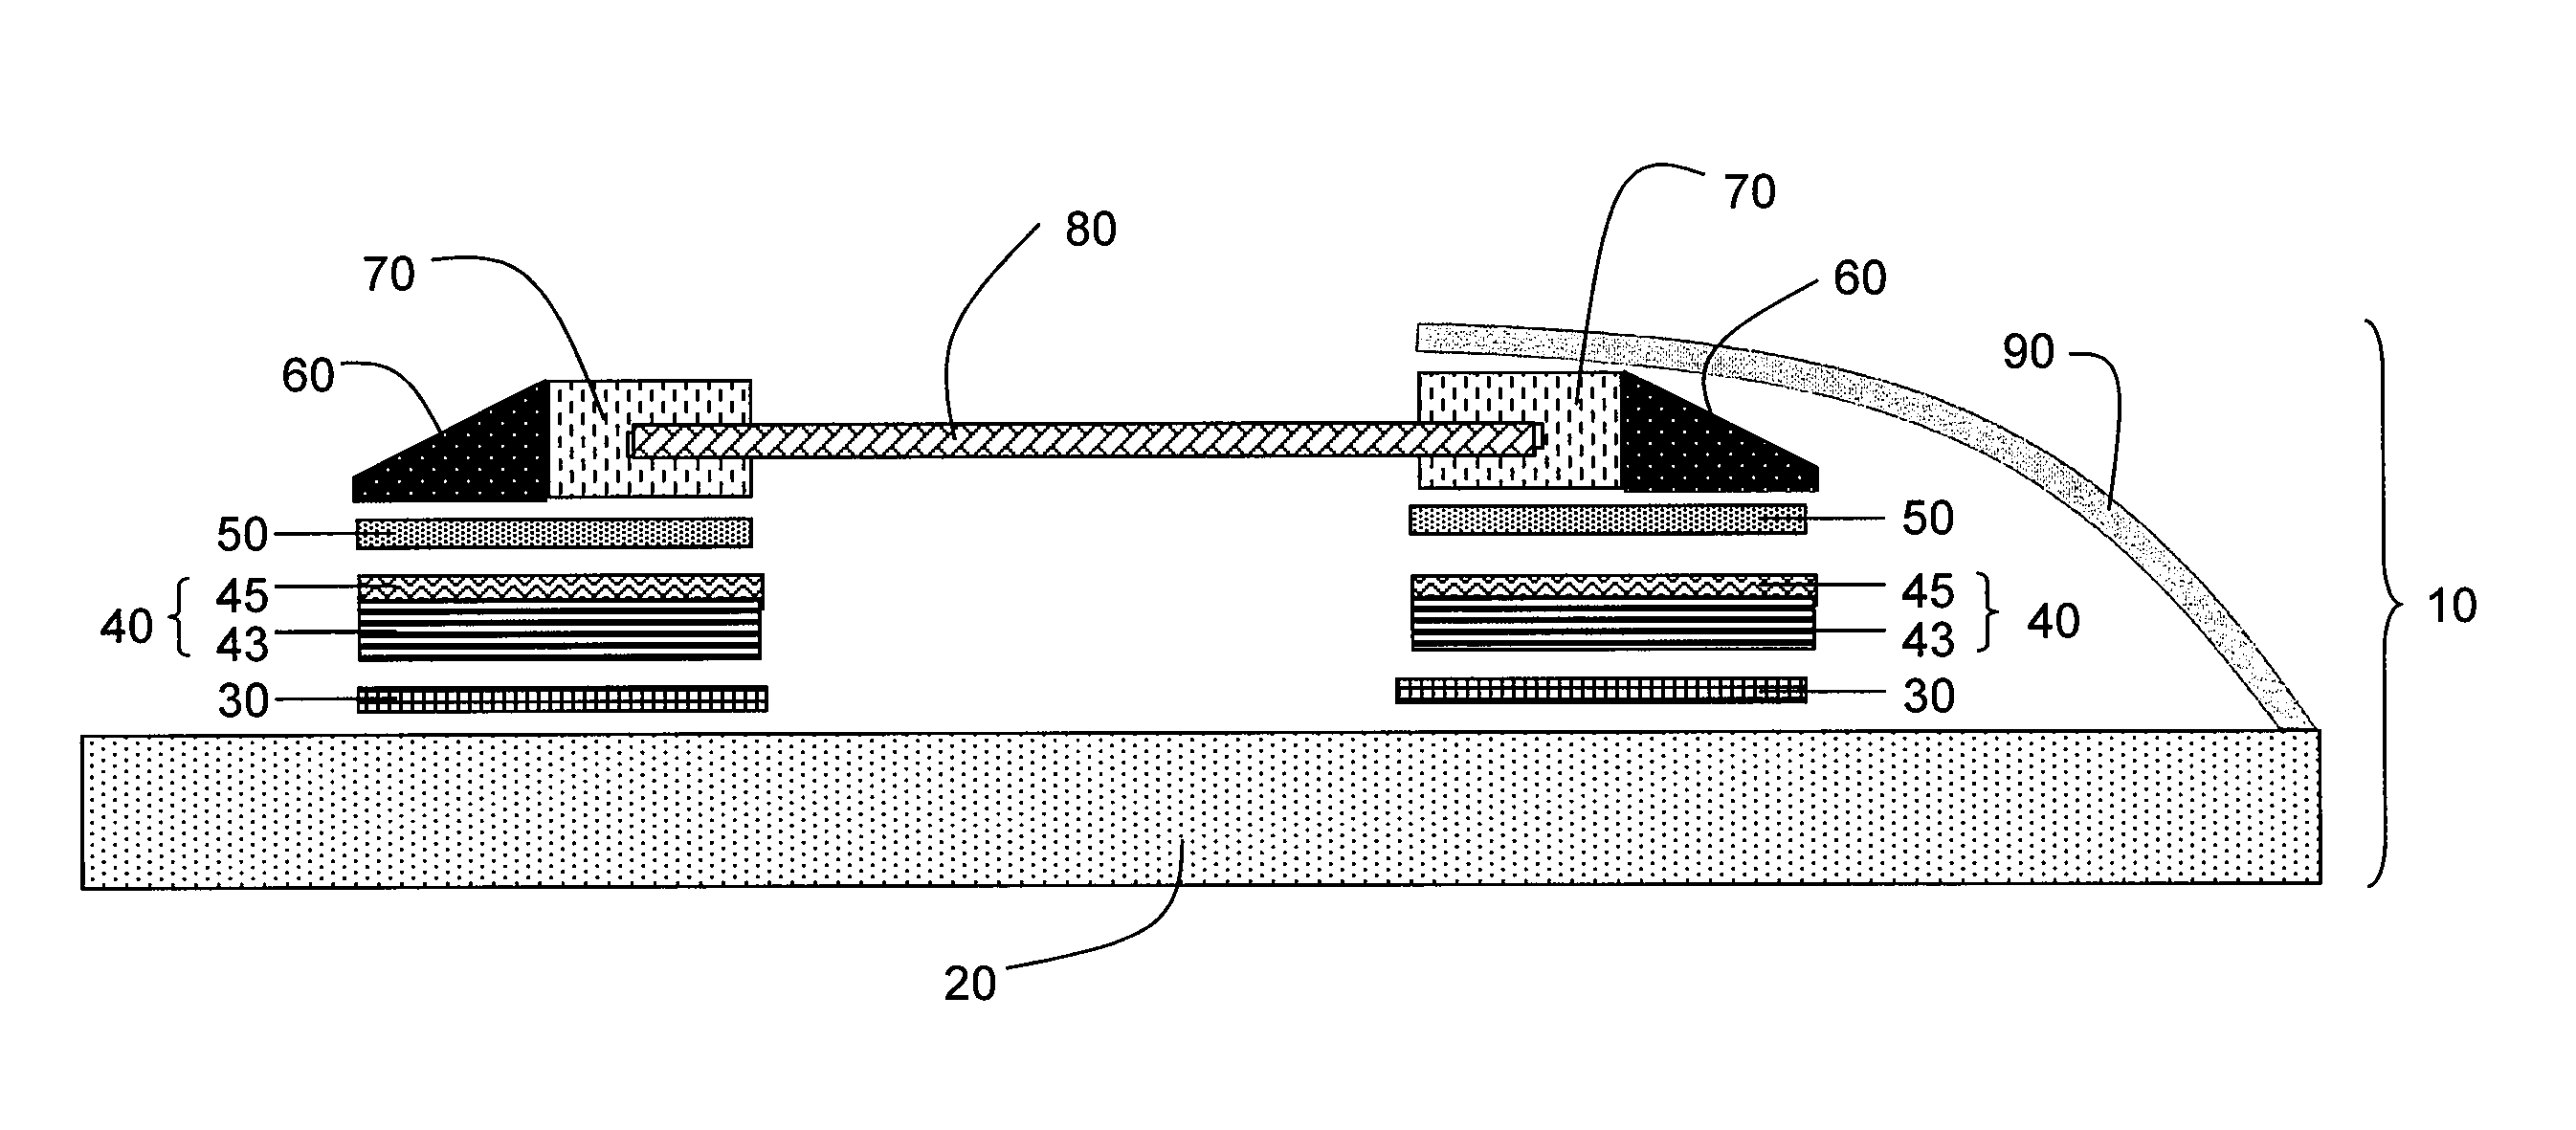 Attachment of photovoltaic devices to substrates using slotted extrusion members